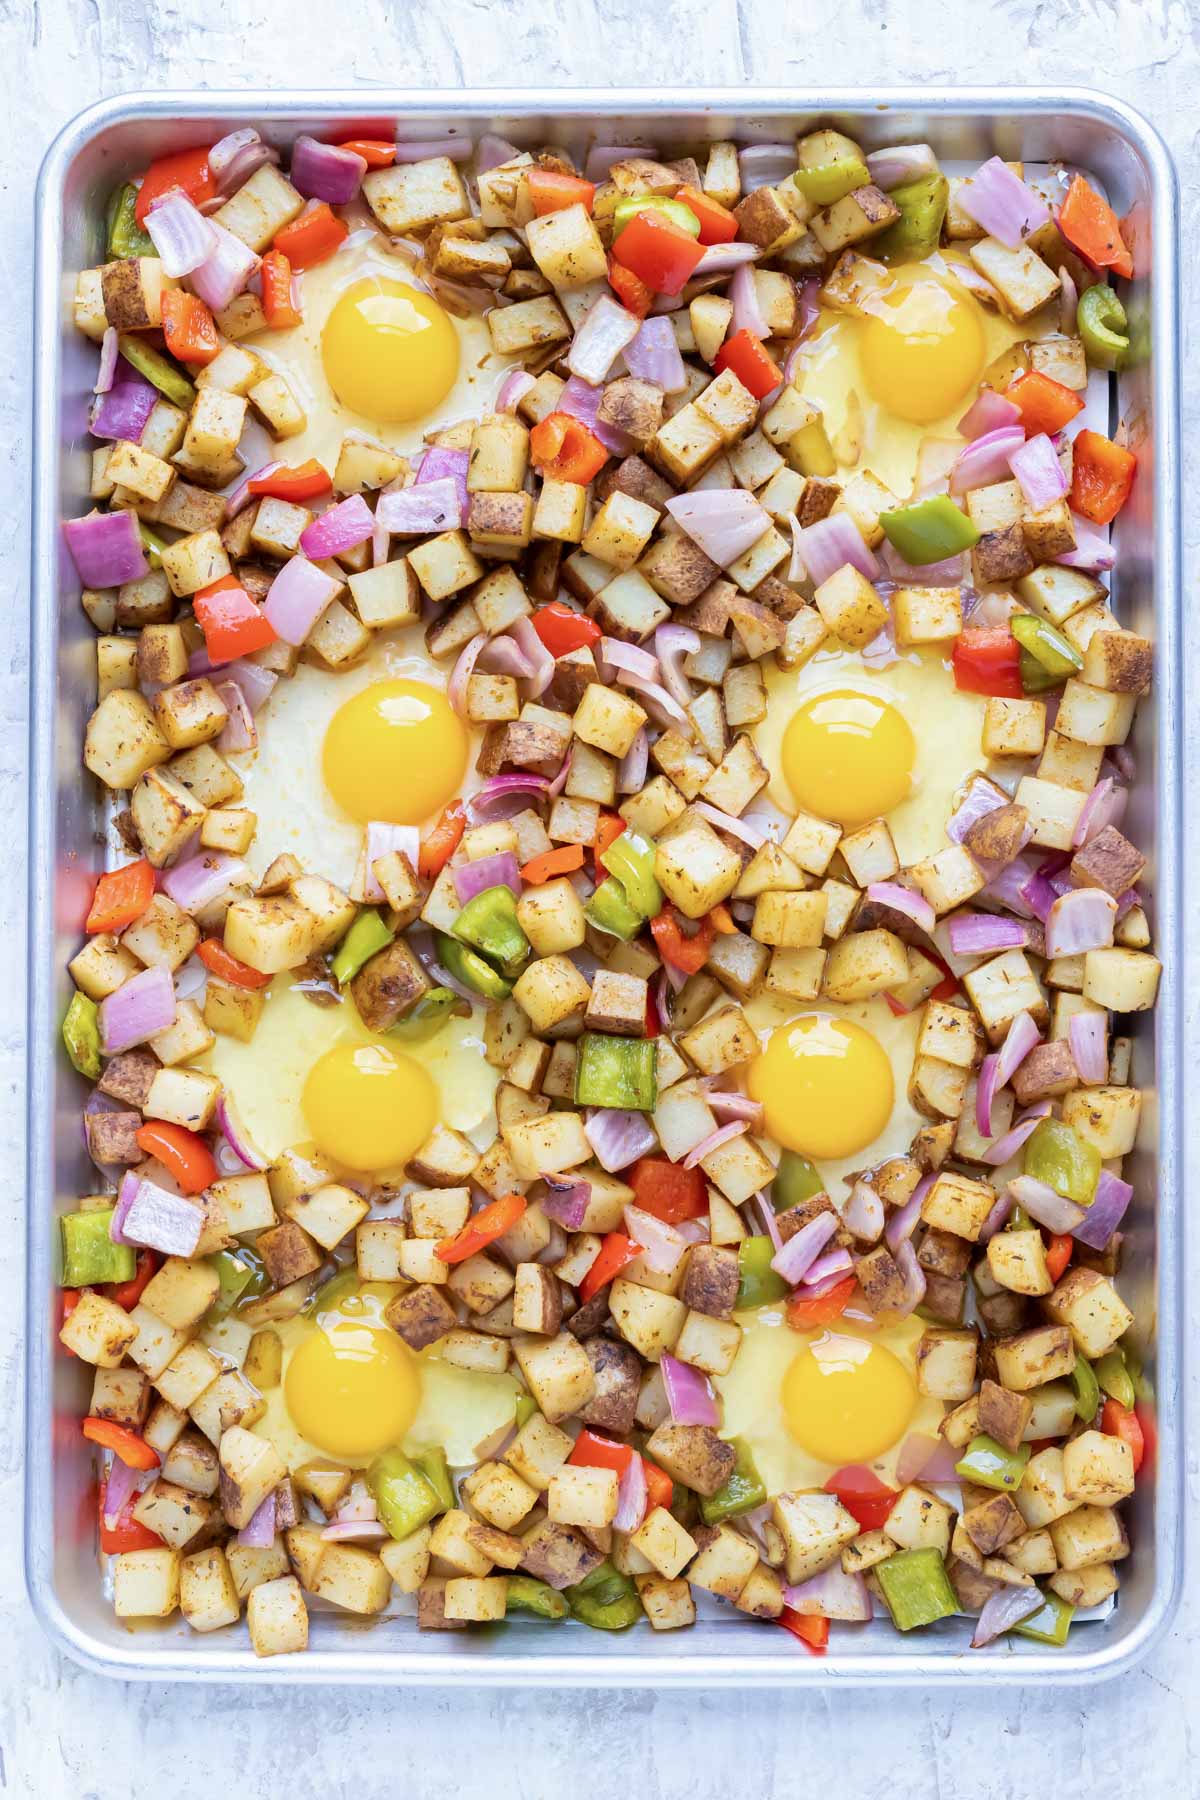 8 eggs are cracked into the wells formed in chopped veggies.